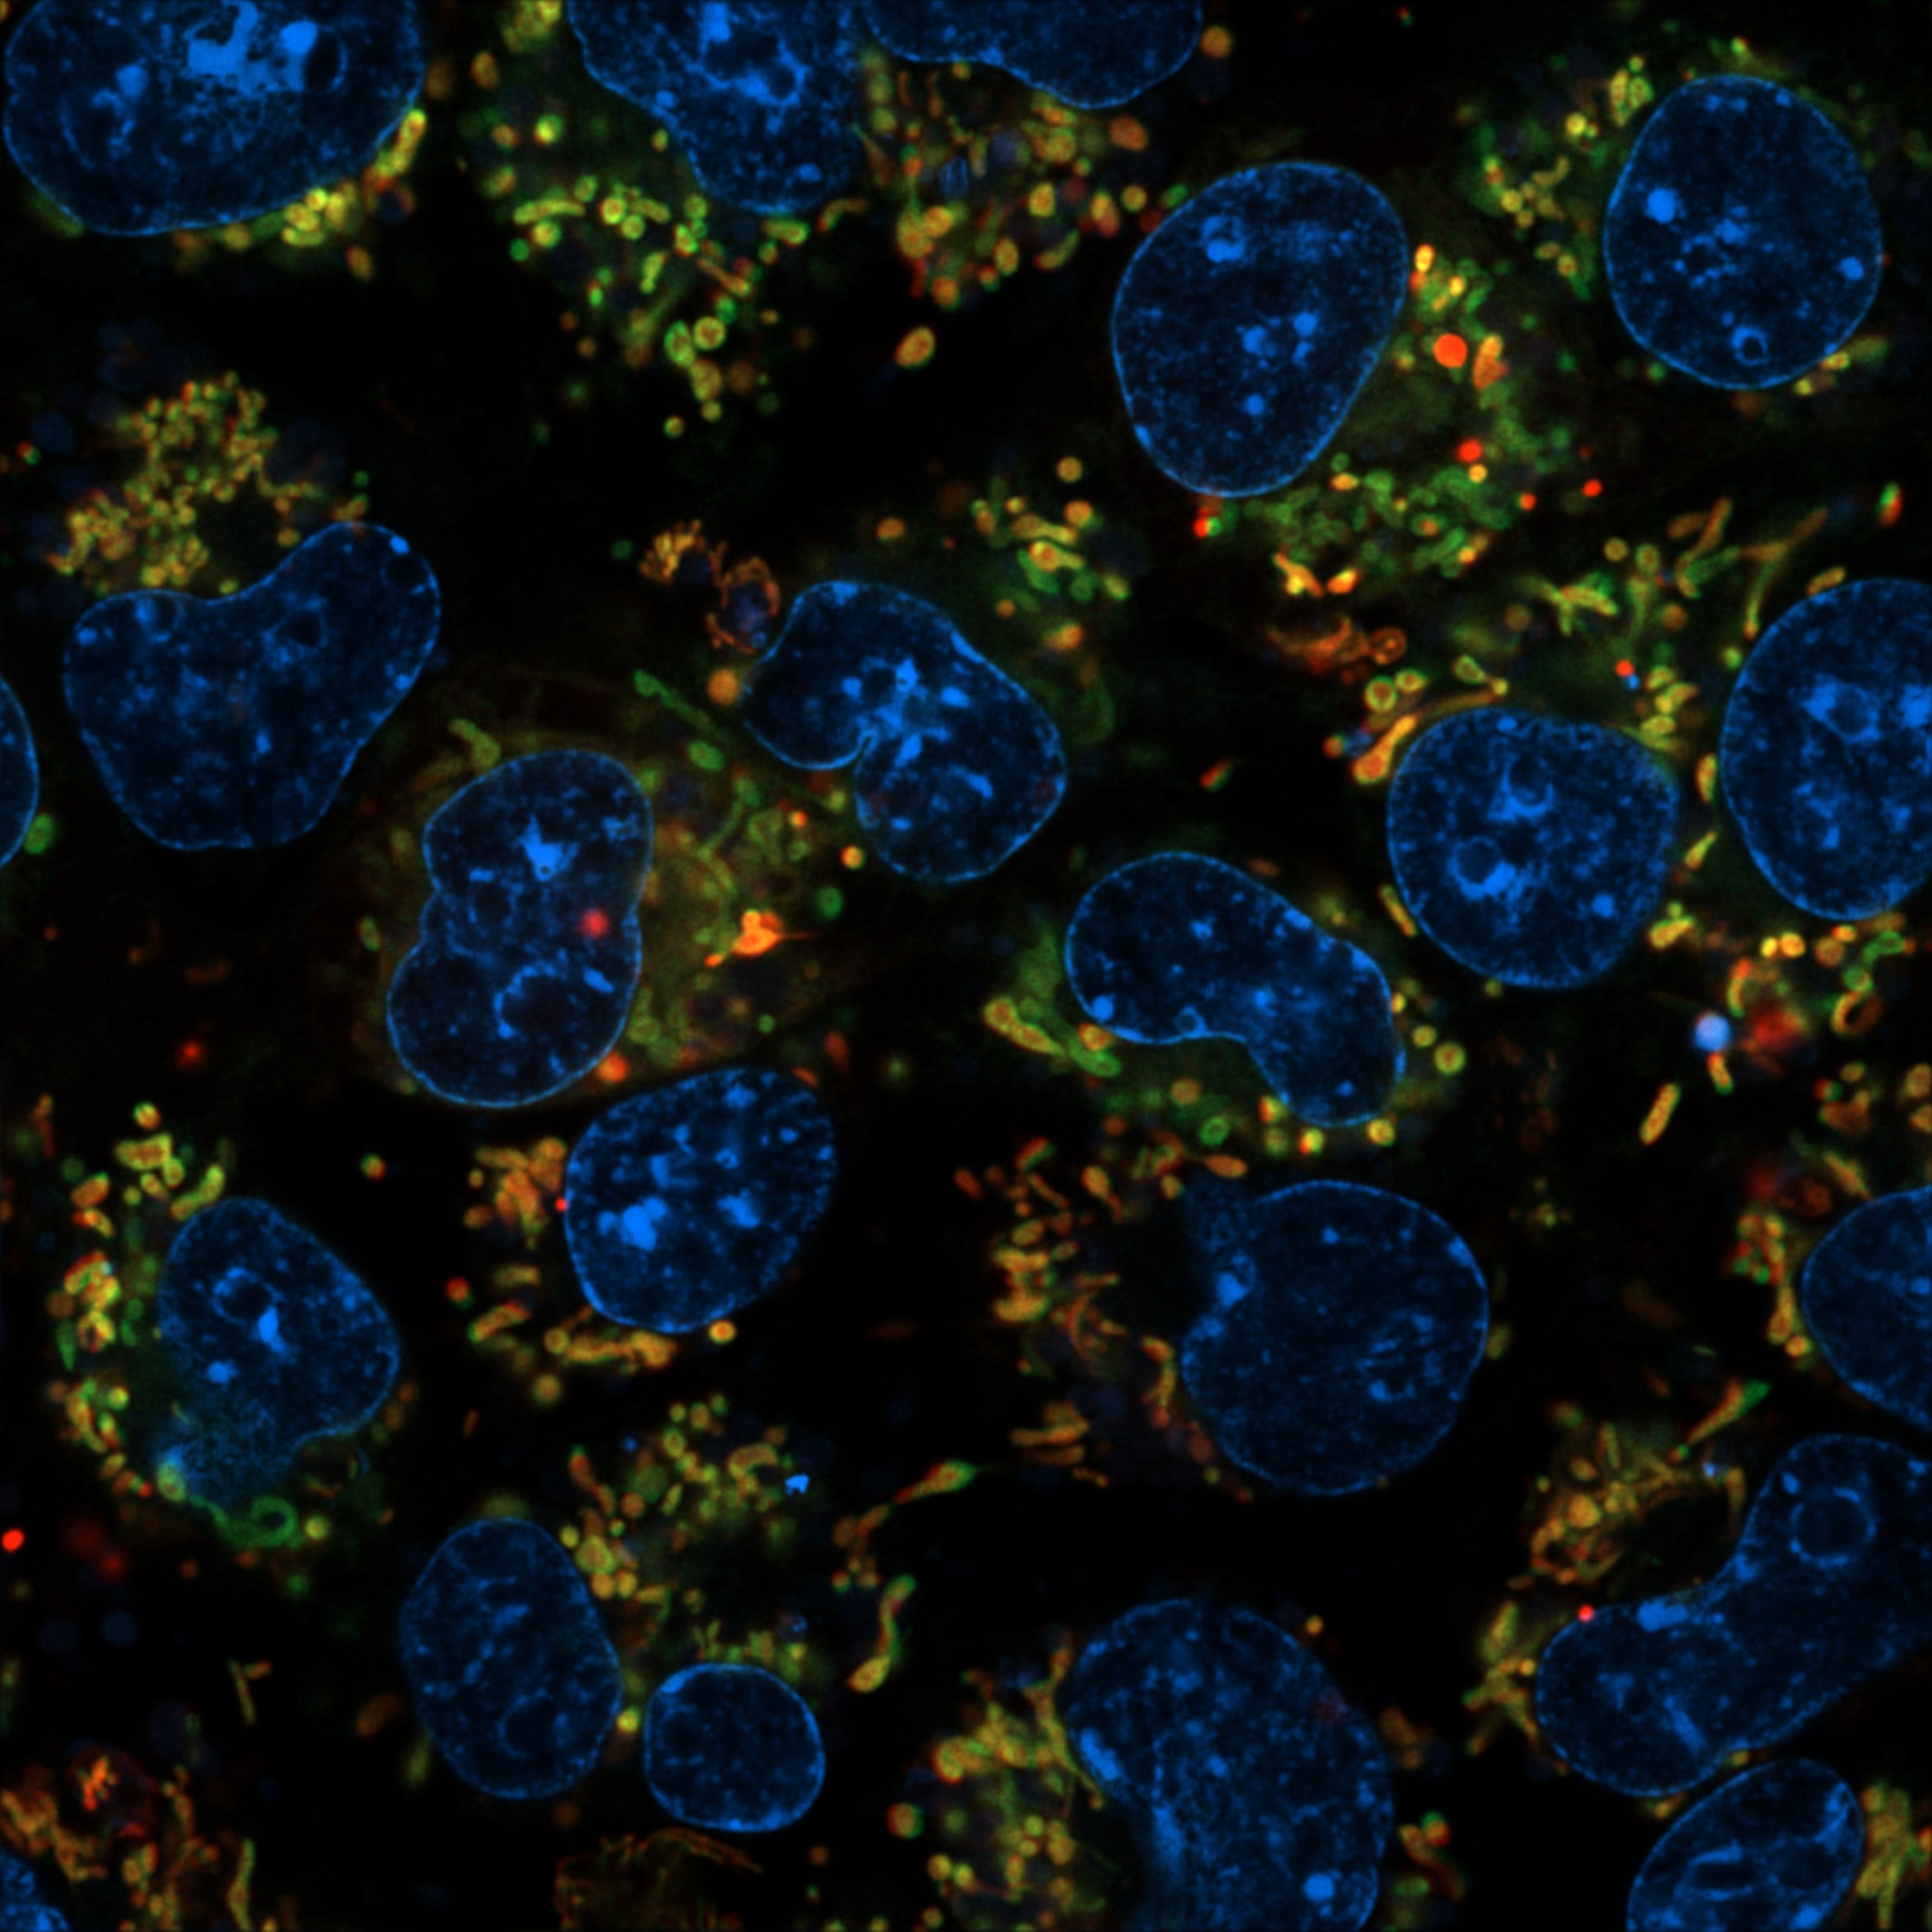 nuclei and mitochondria marked with fluorescent dyes -ft CREDITS@CEINGE